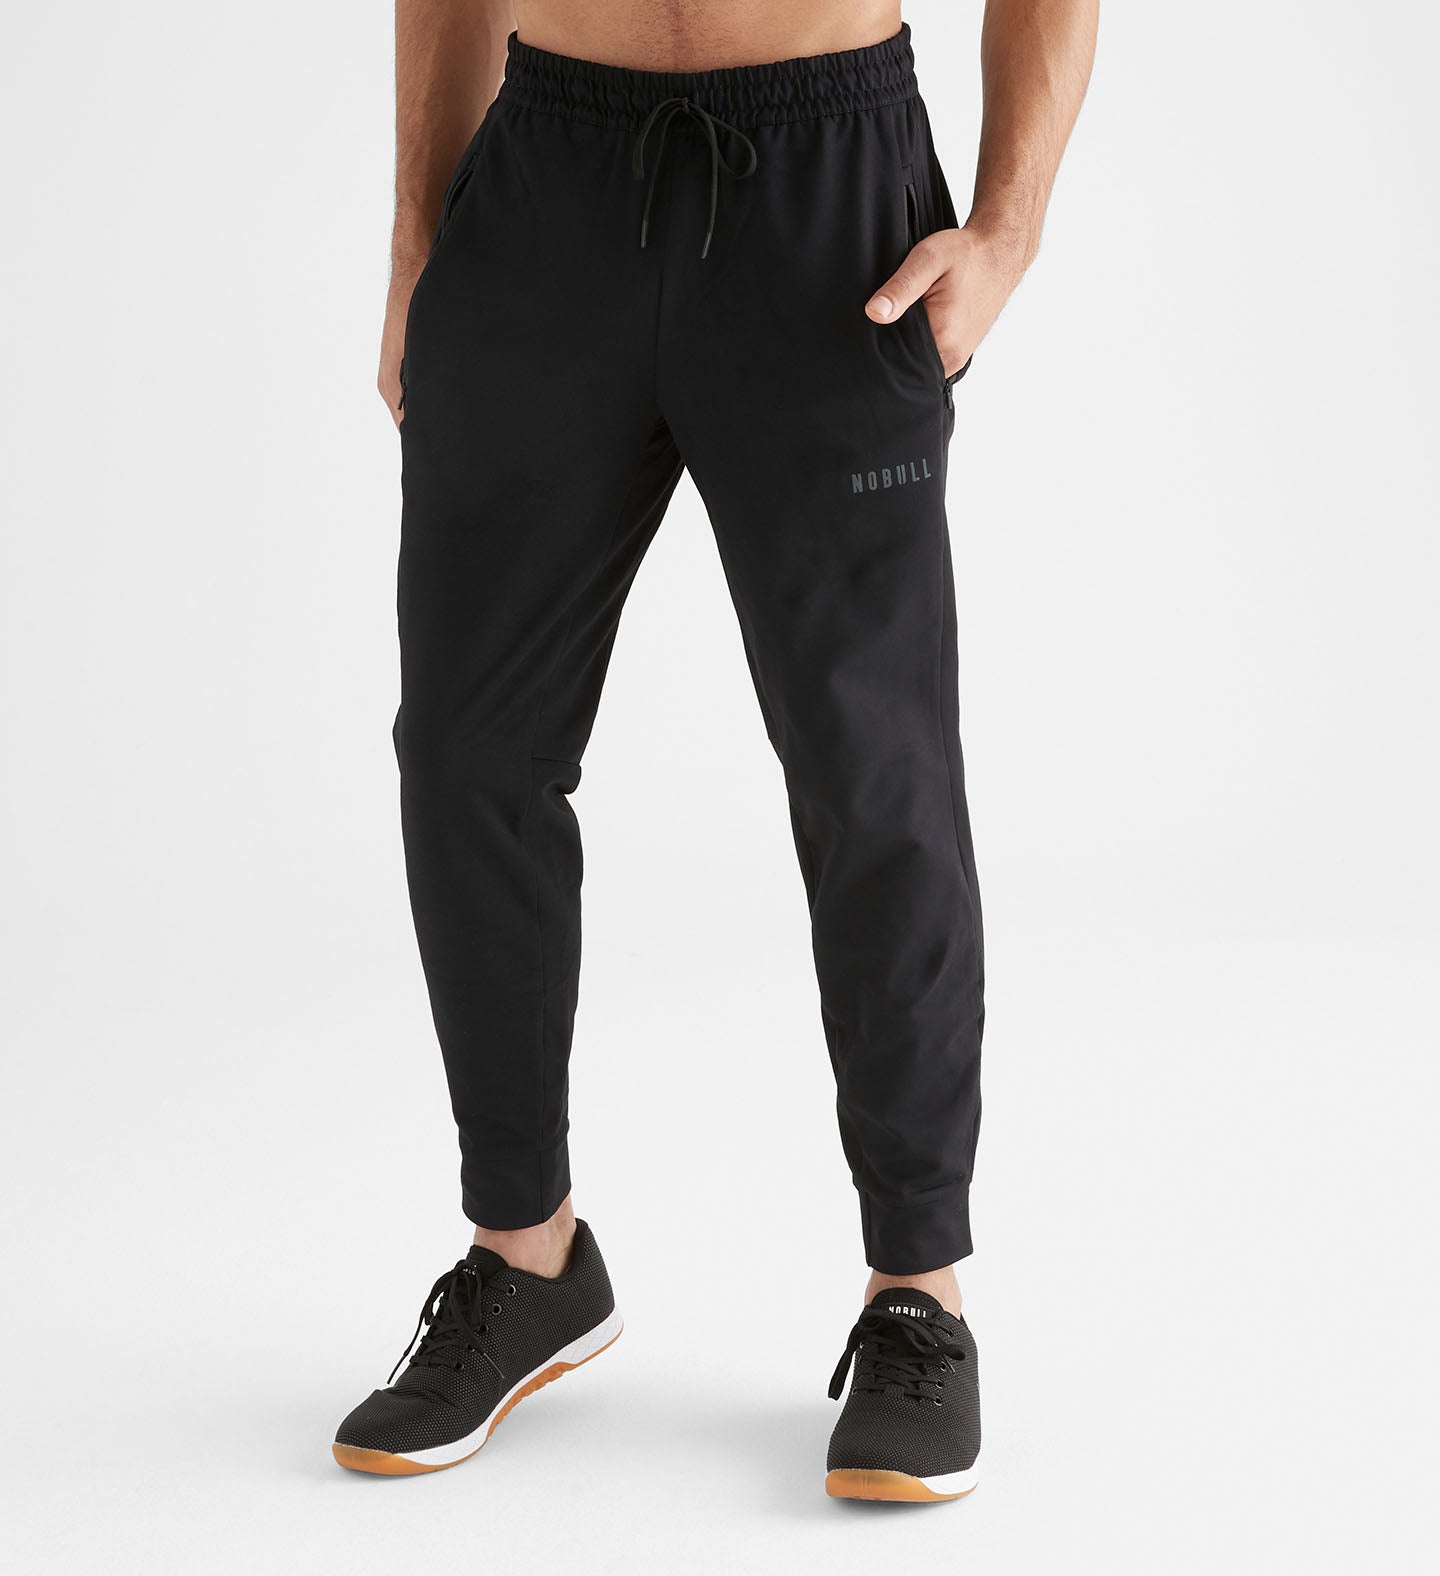 Free People Movement Black Cotton Jogger Workout Gym Athletic Size